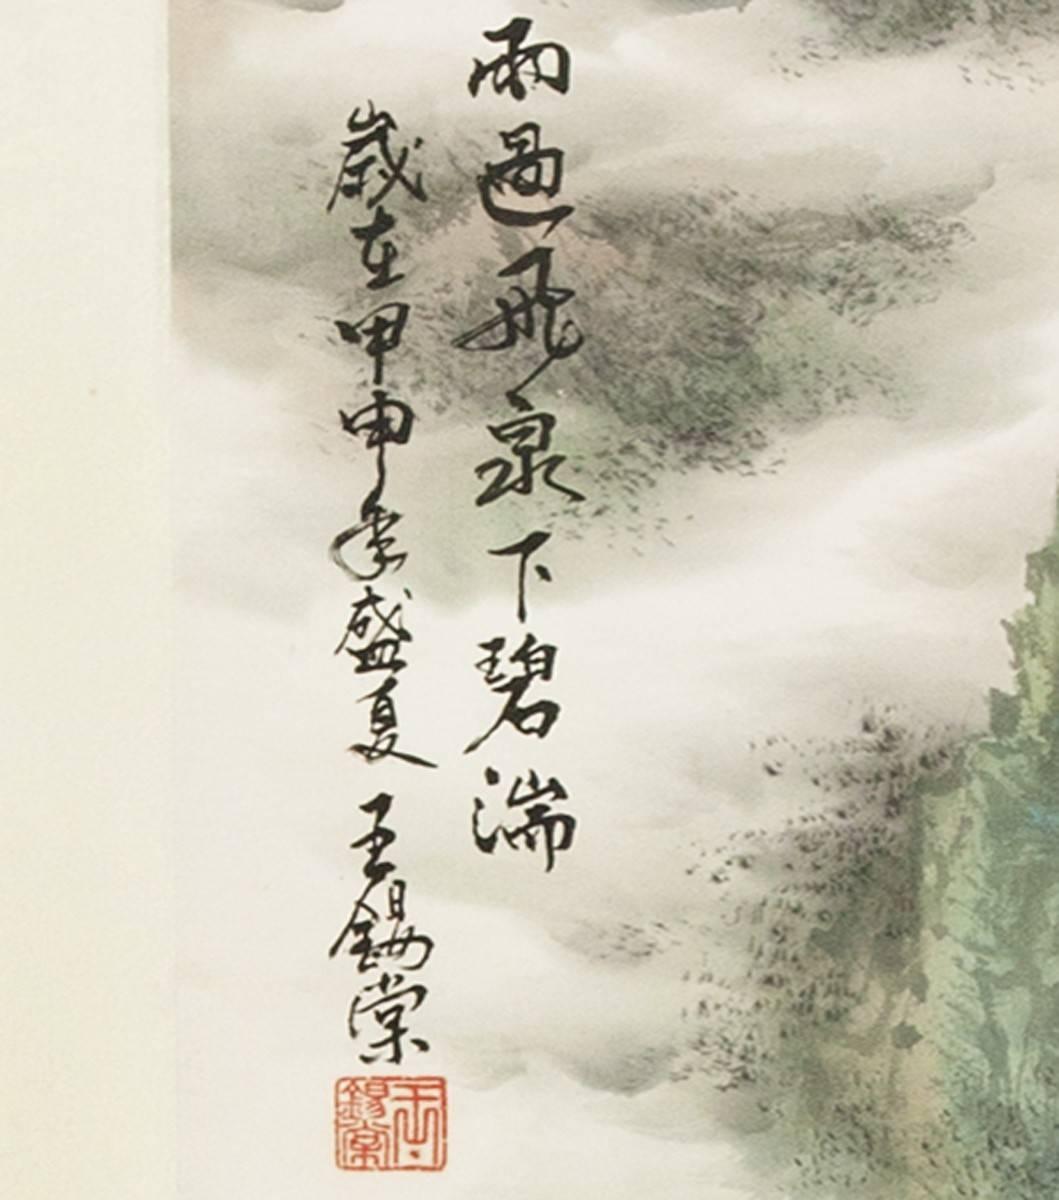 The beauty of Chinese painting, be handed down for centuries, bringing down to us the most ancient artistic traditions. An example of this great painting that combines the classical representation landscape of rivers and mountains to contemporary